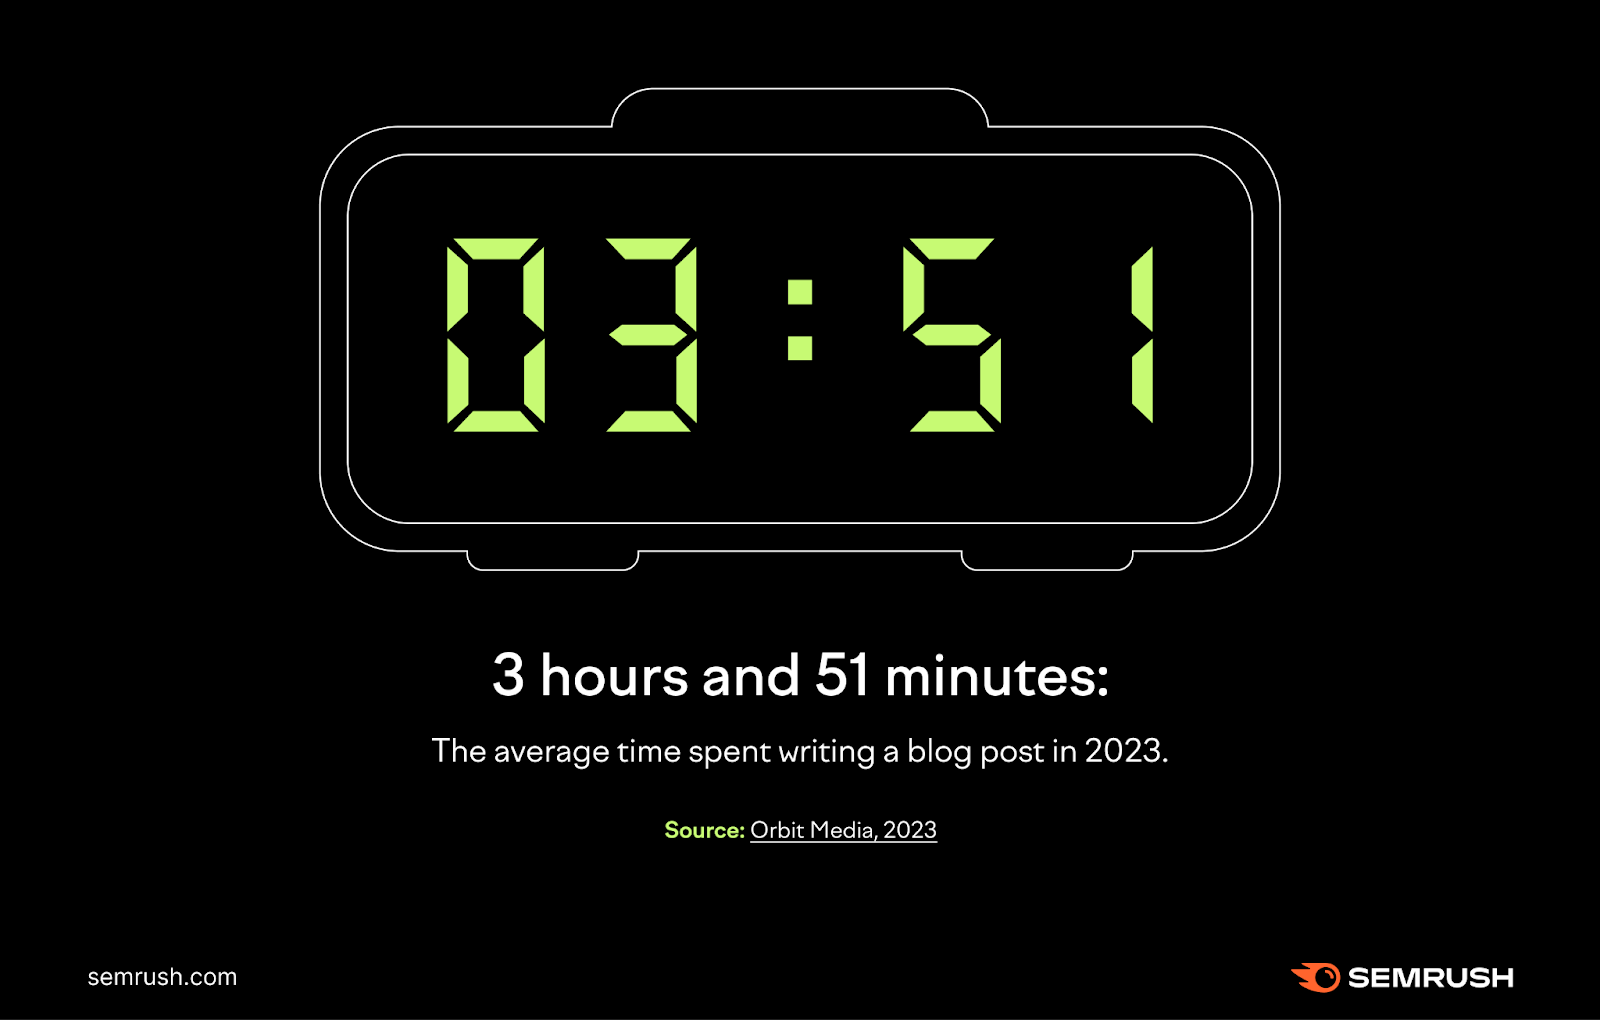 3 hours and 51 minutes: The average time spent writing a blog post in 2023.